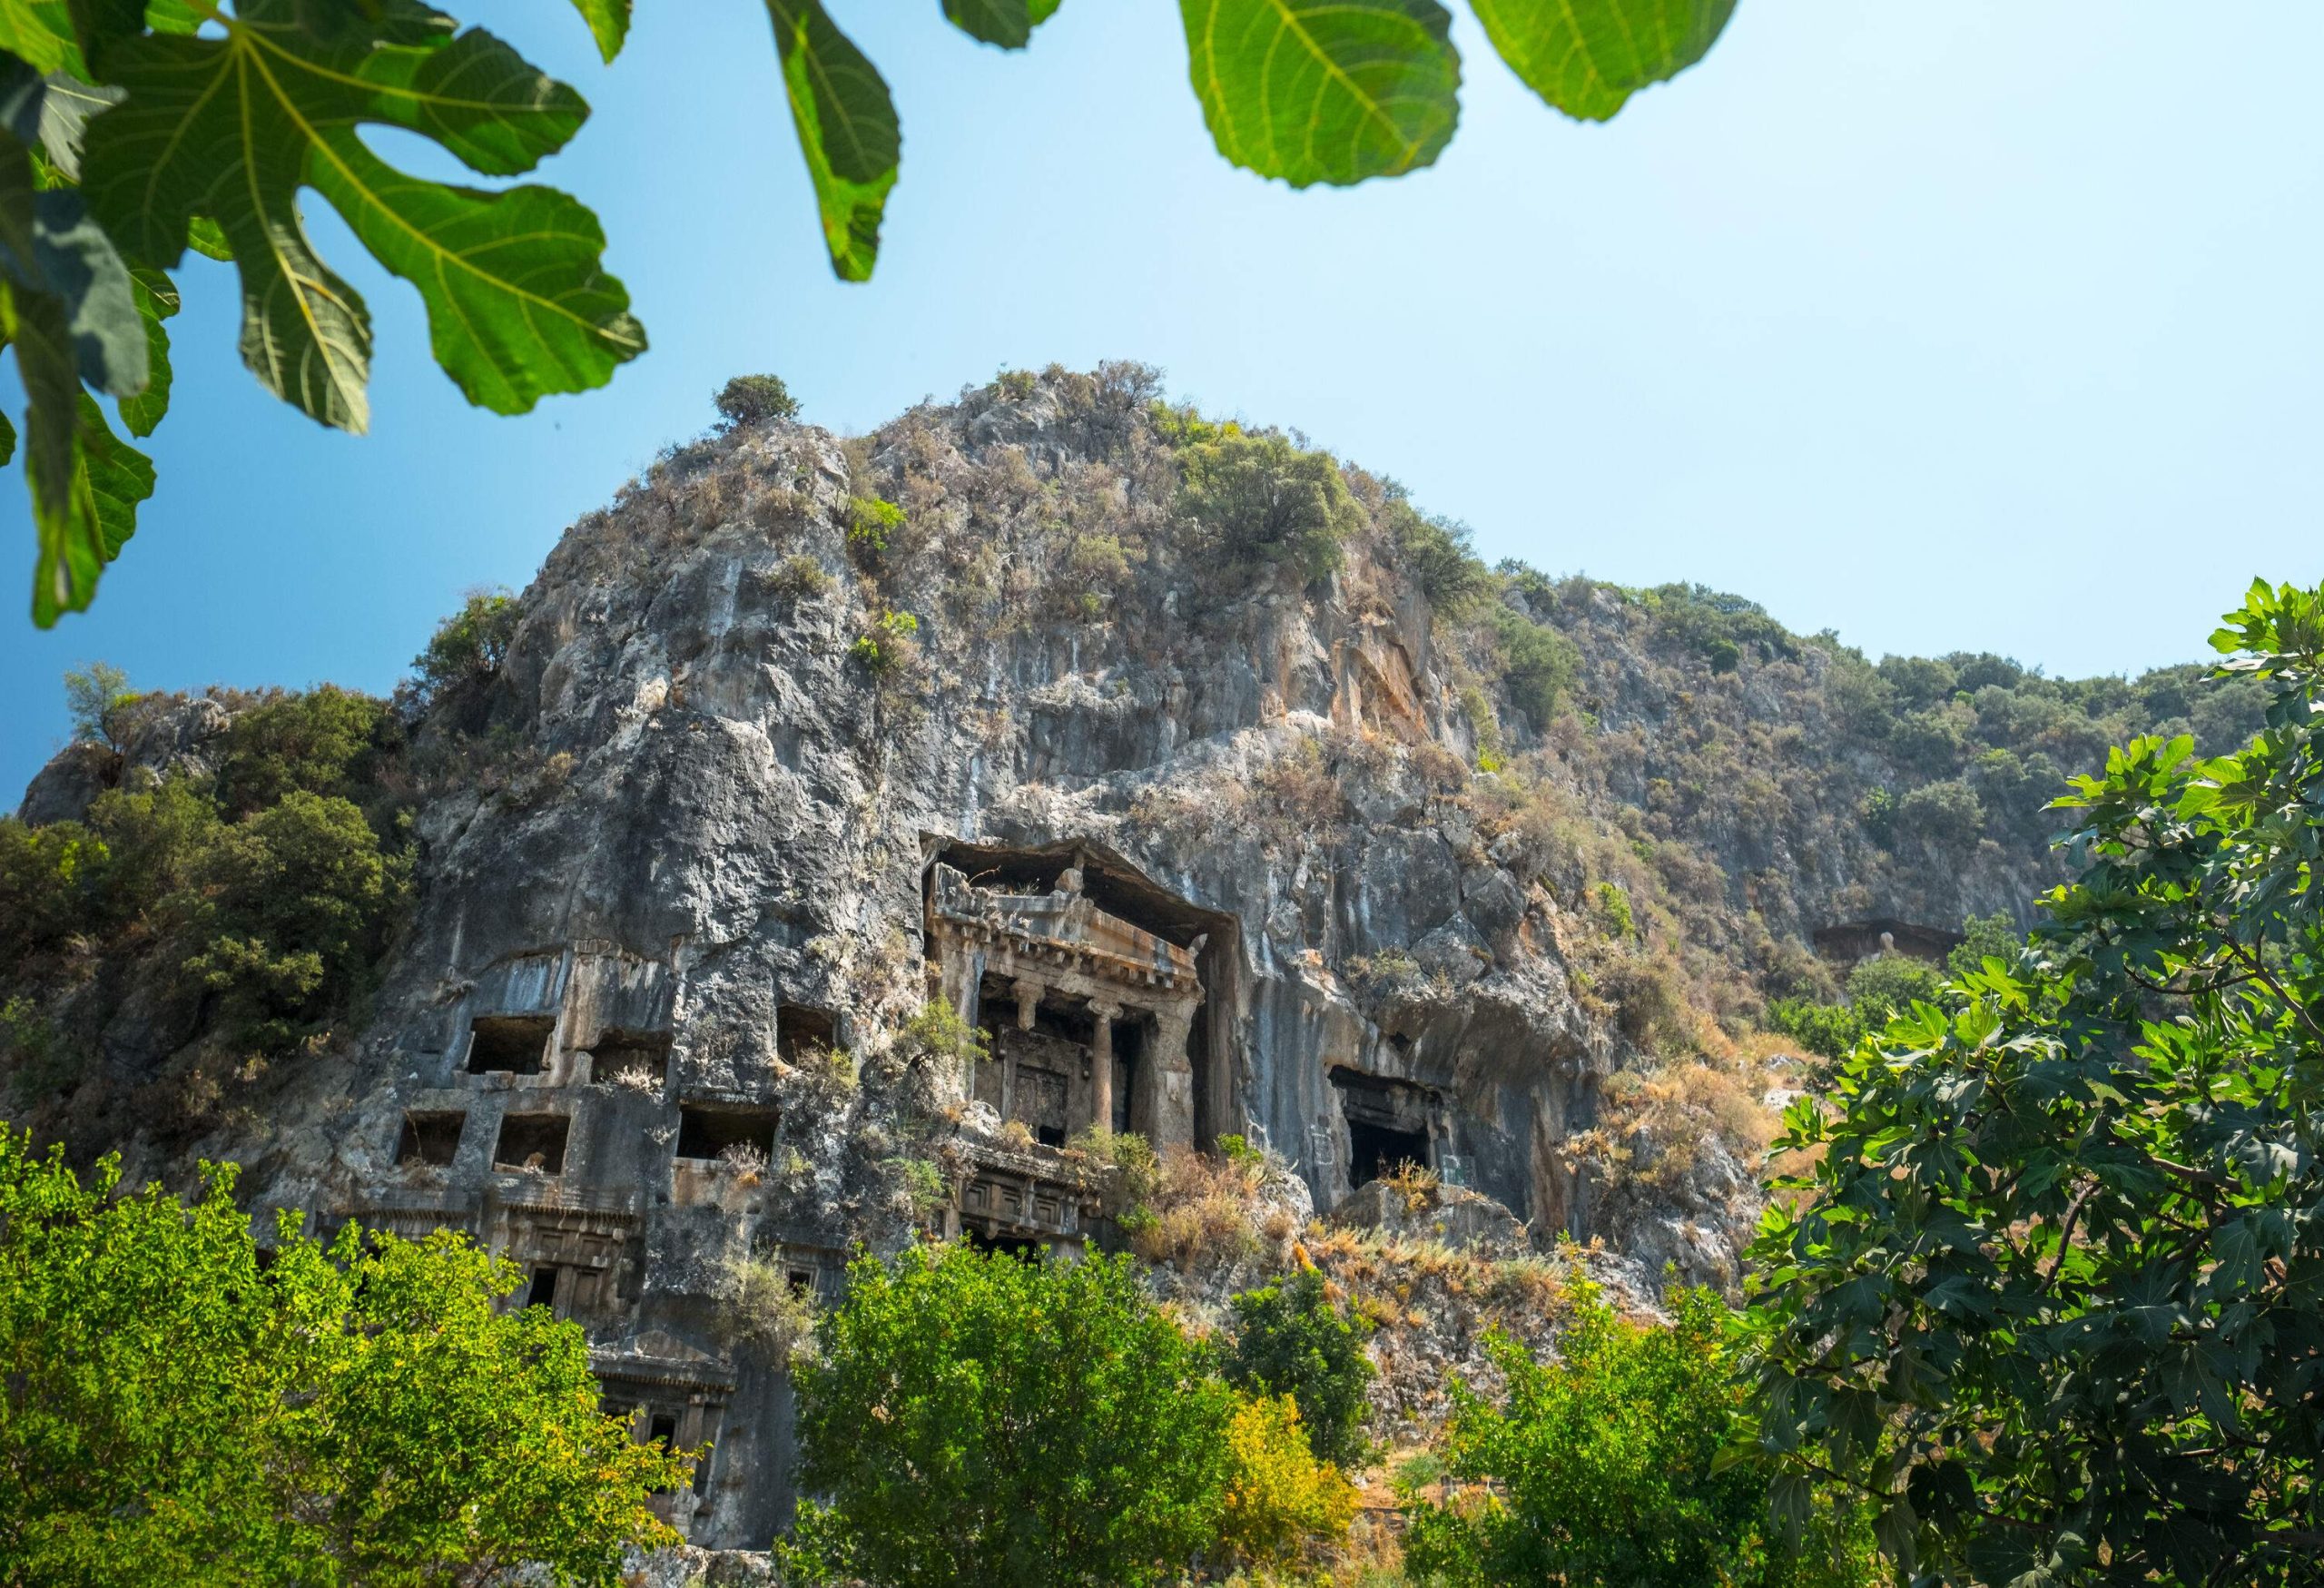 Historical rock tombs of pediments with columns are hewn from the lush cliff face.